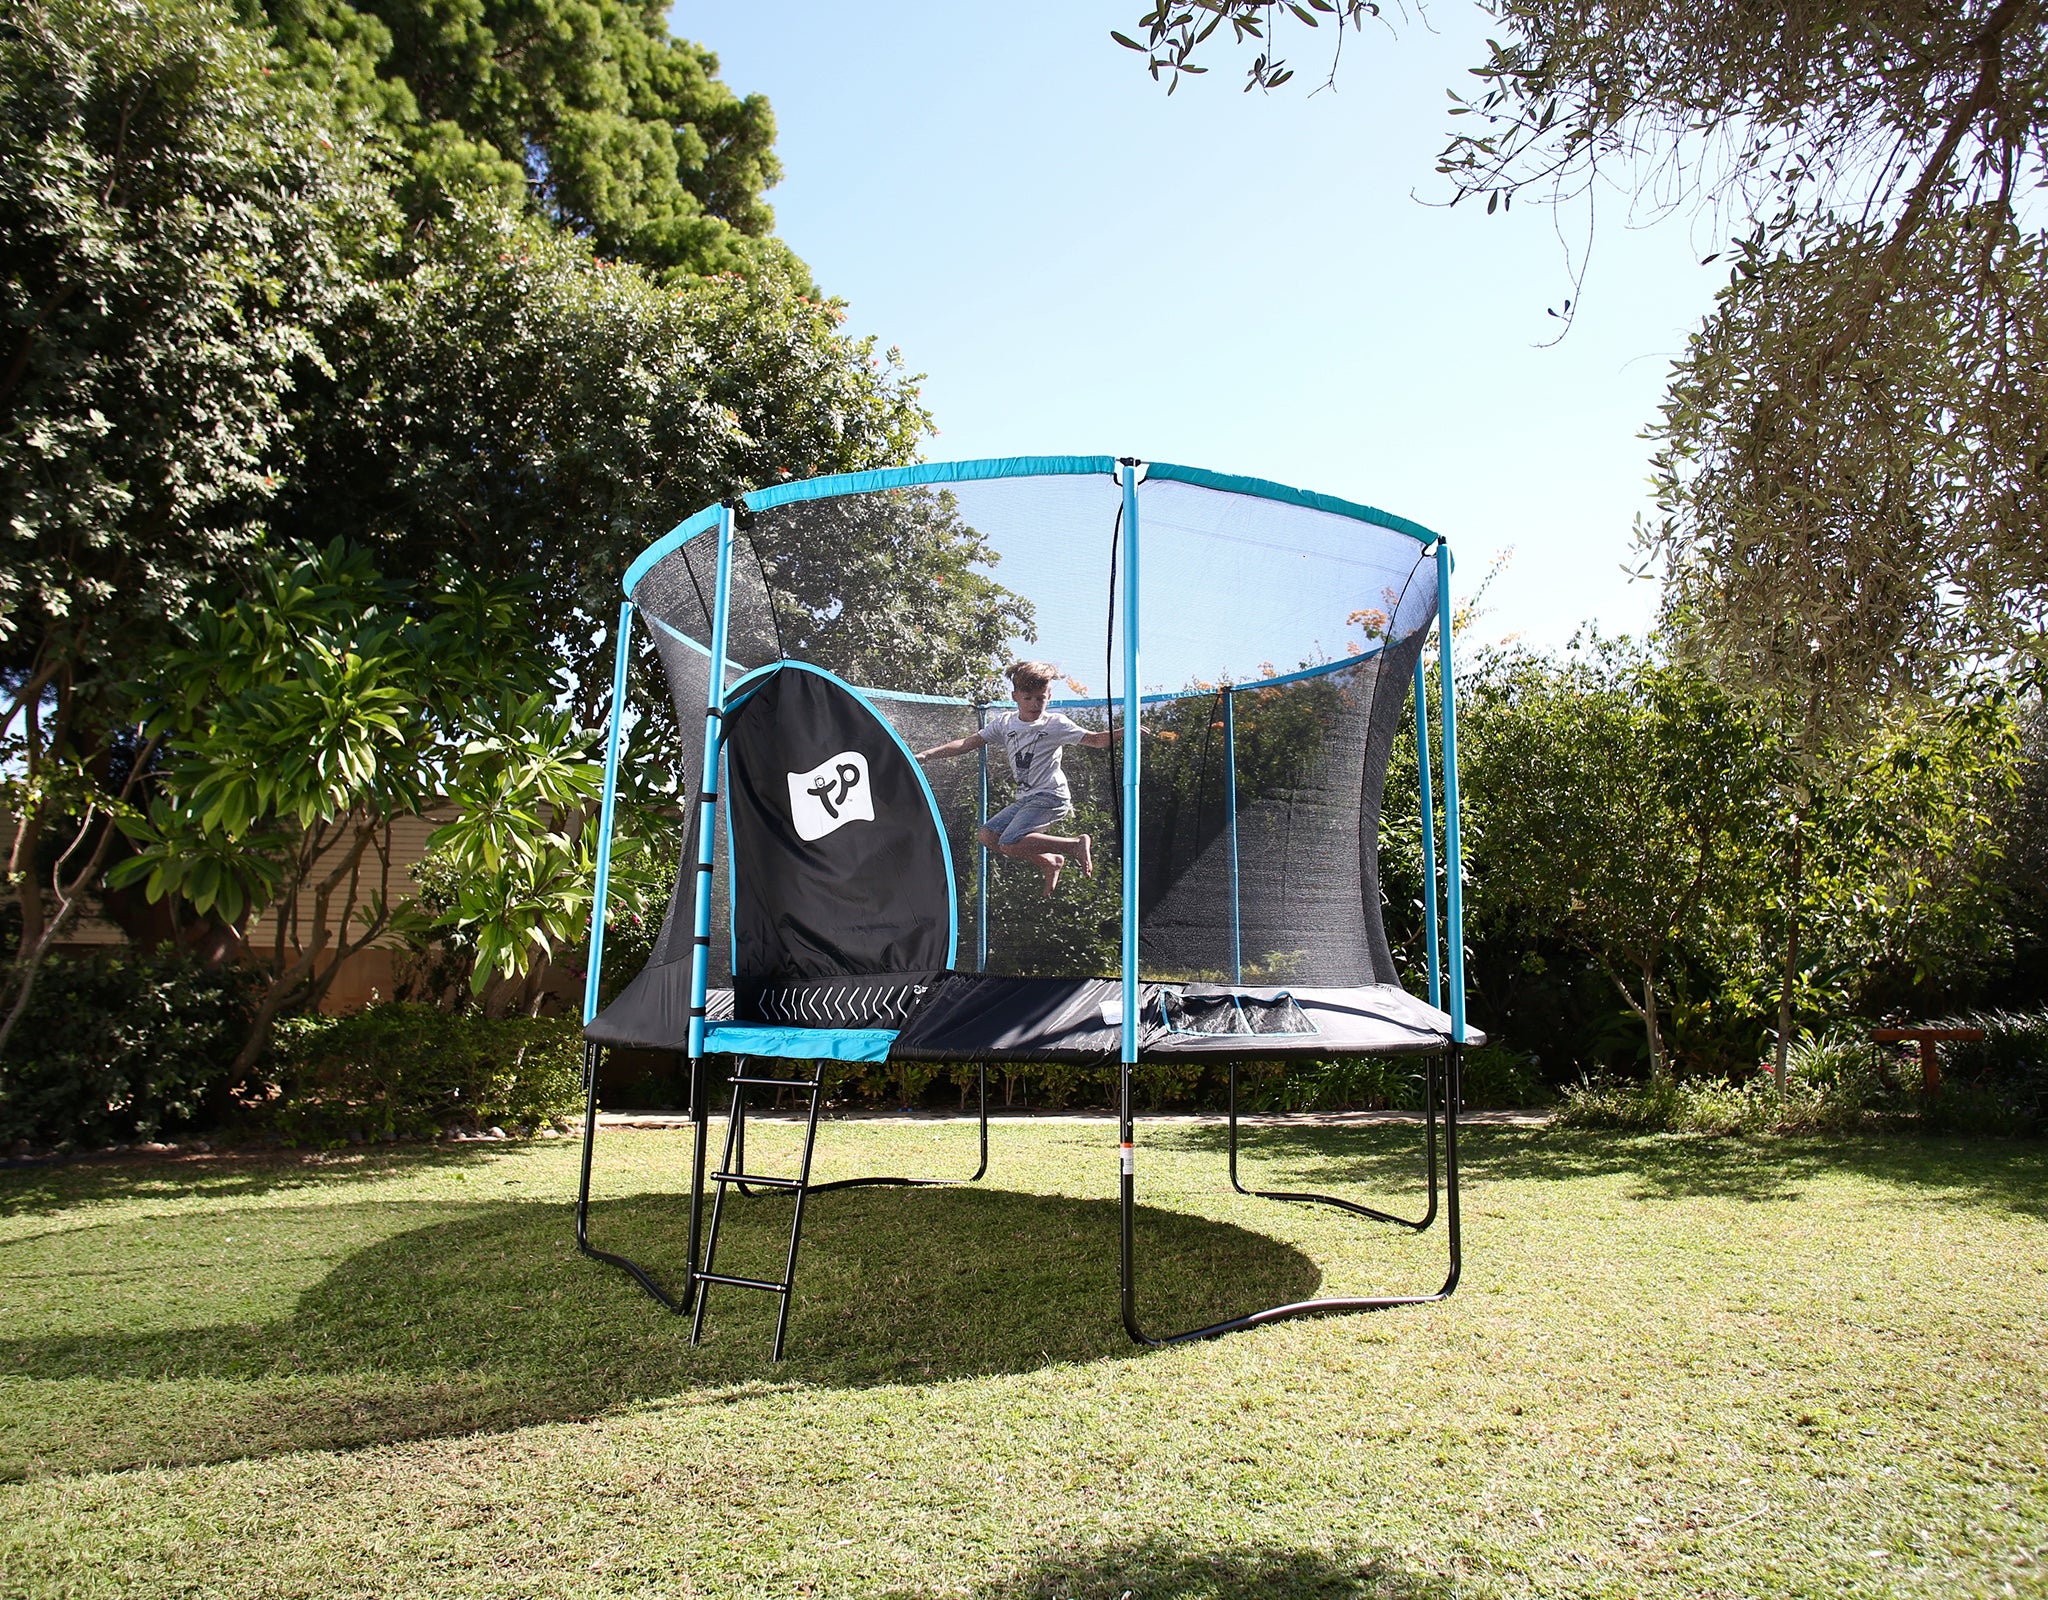  What Should I Look For In A Trampoline: A Buyer's Guide for Measurements and Finding the Best One 